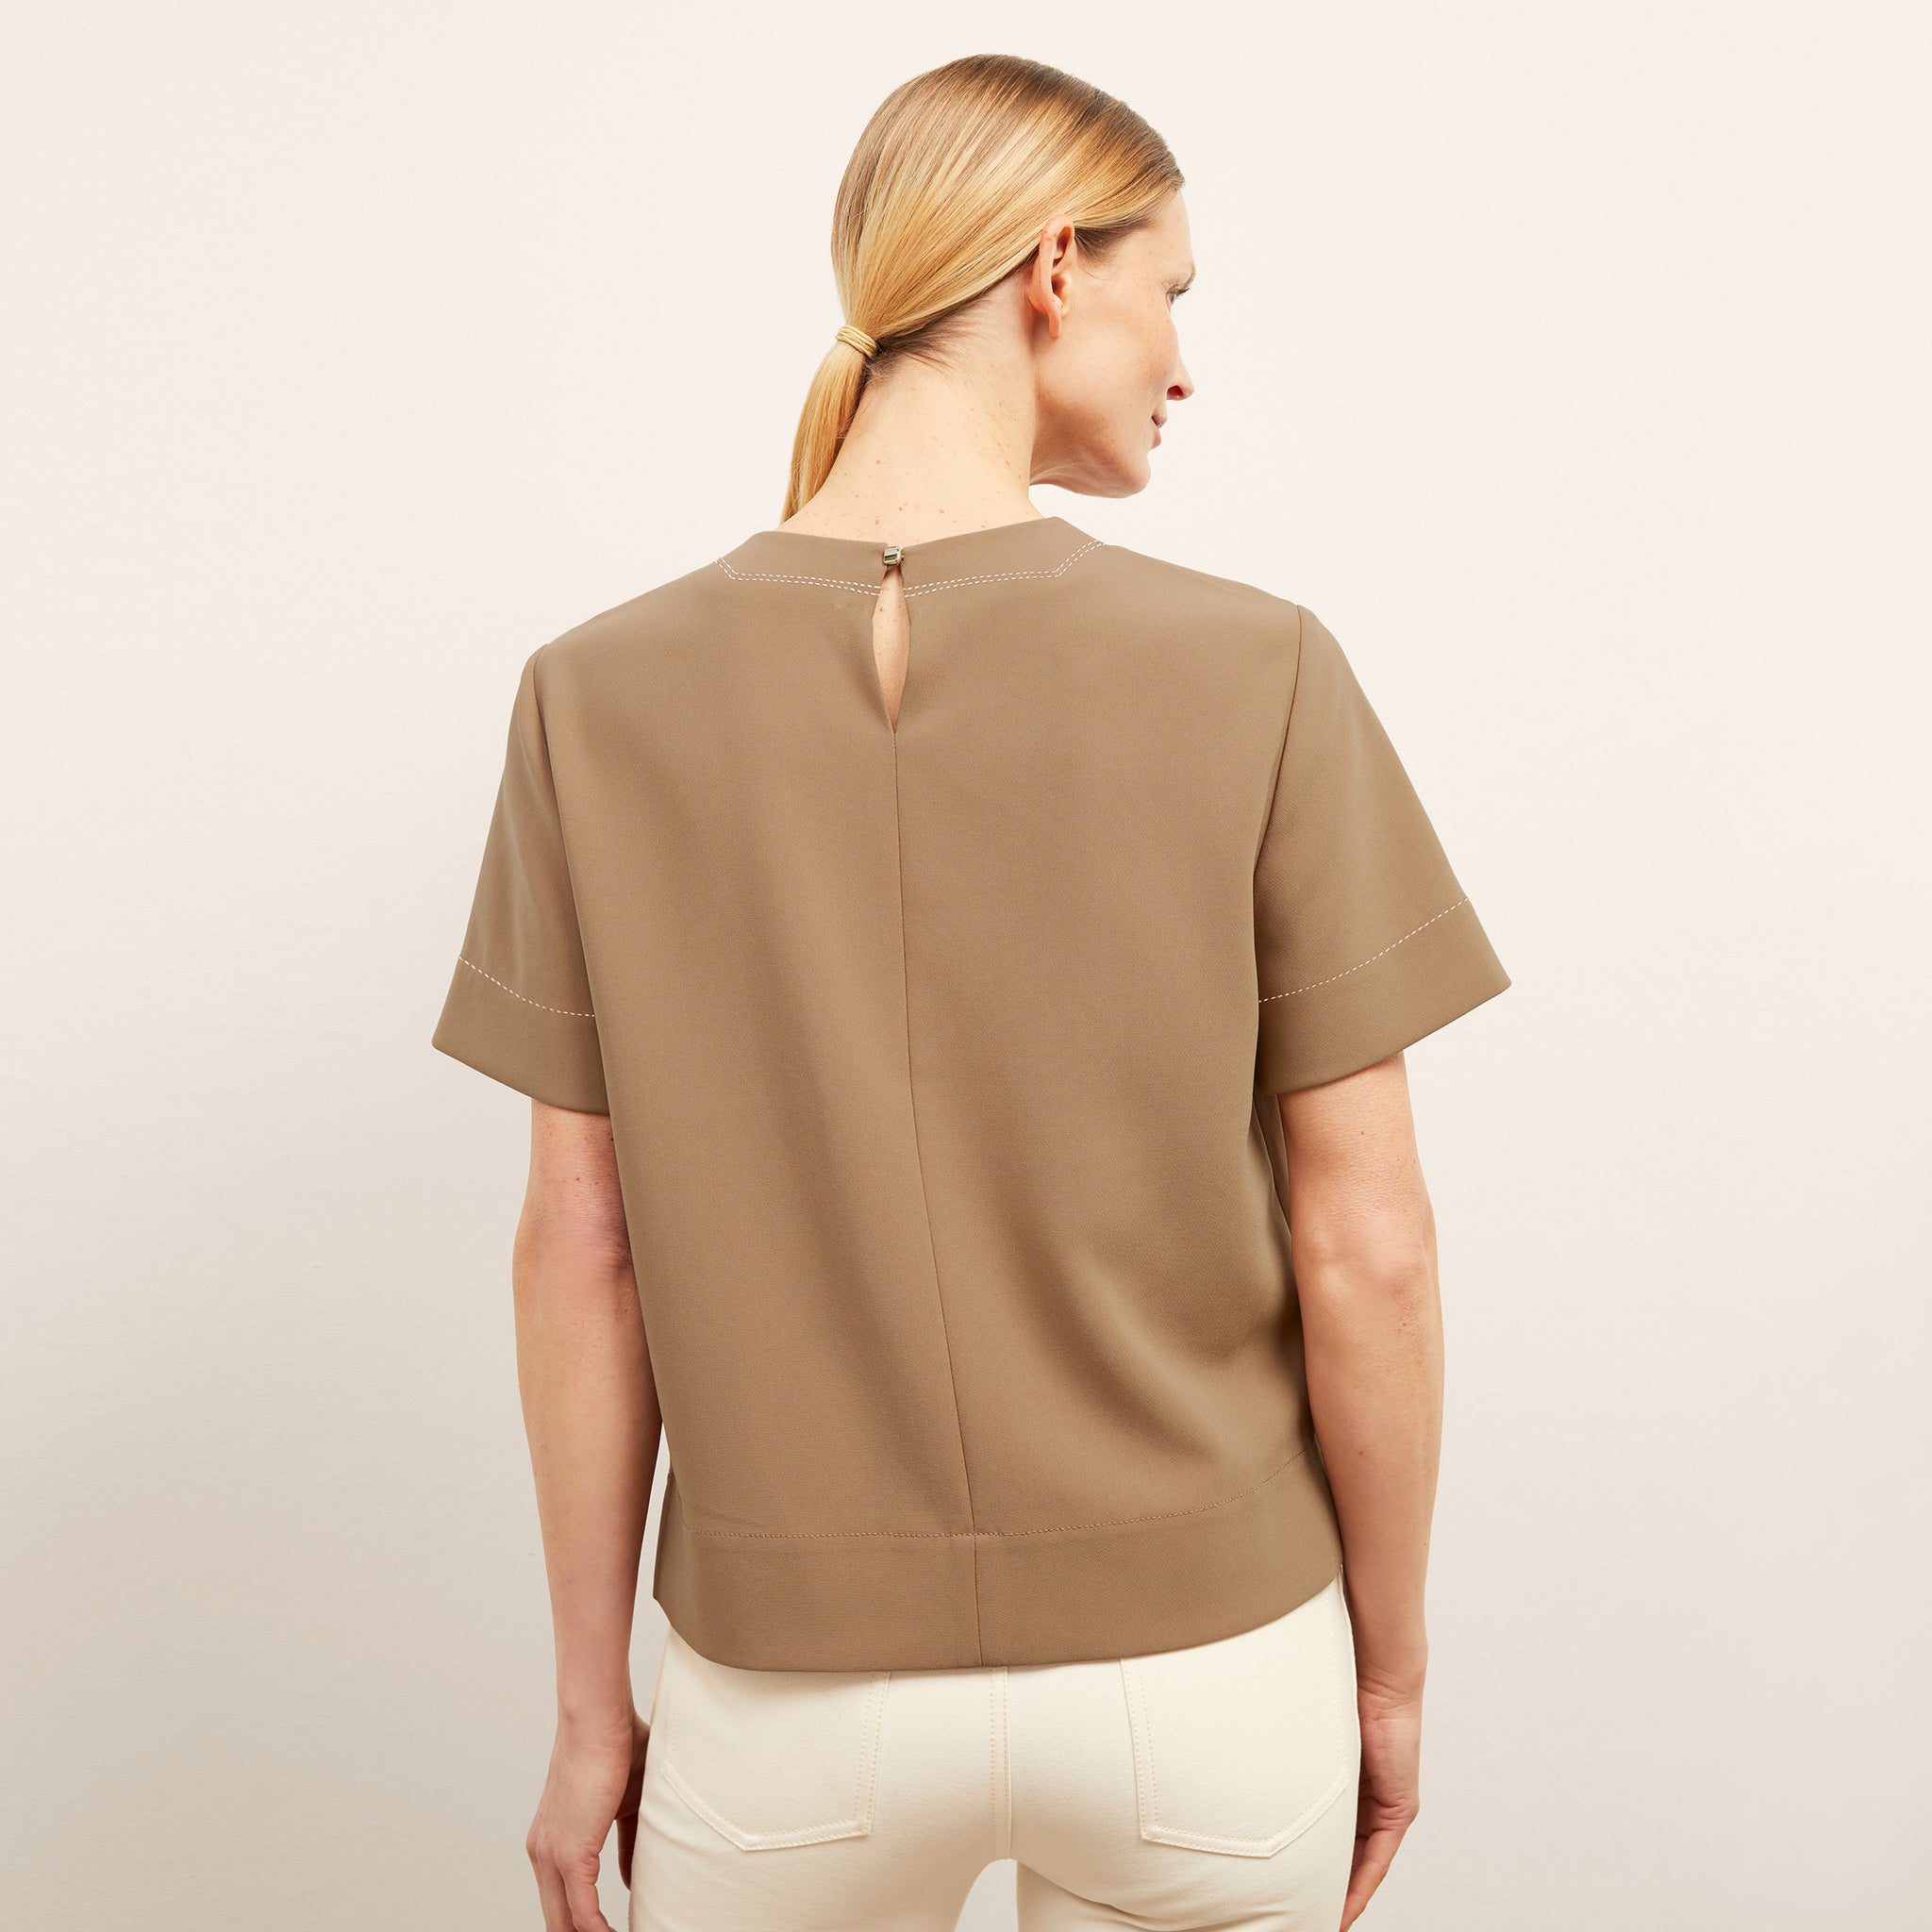 back image of a woman wearing the annika top in saddle